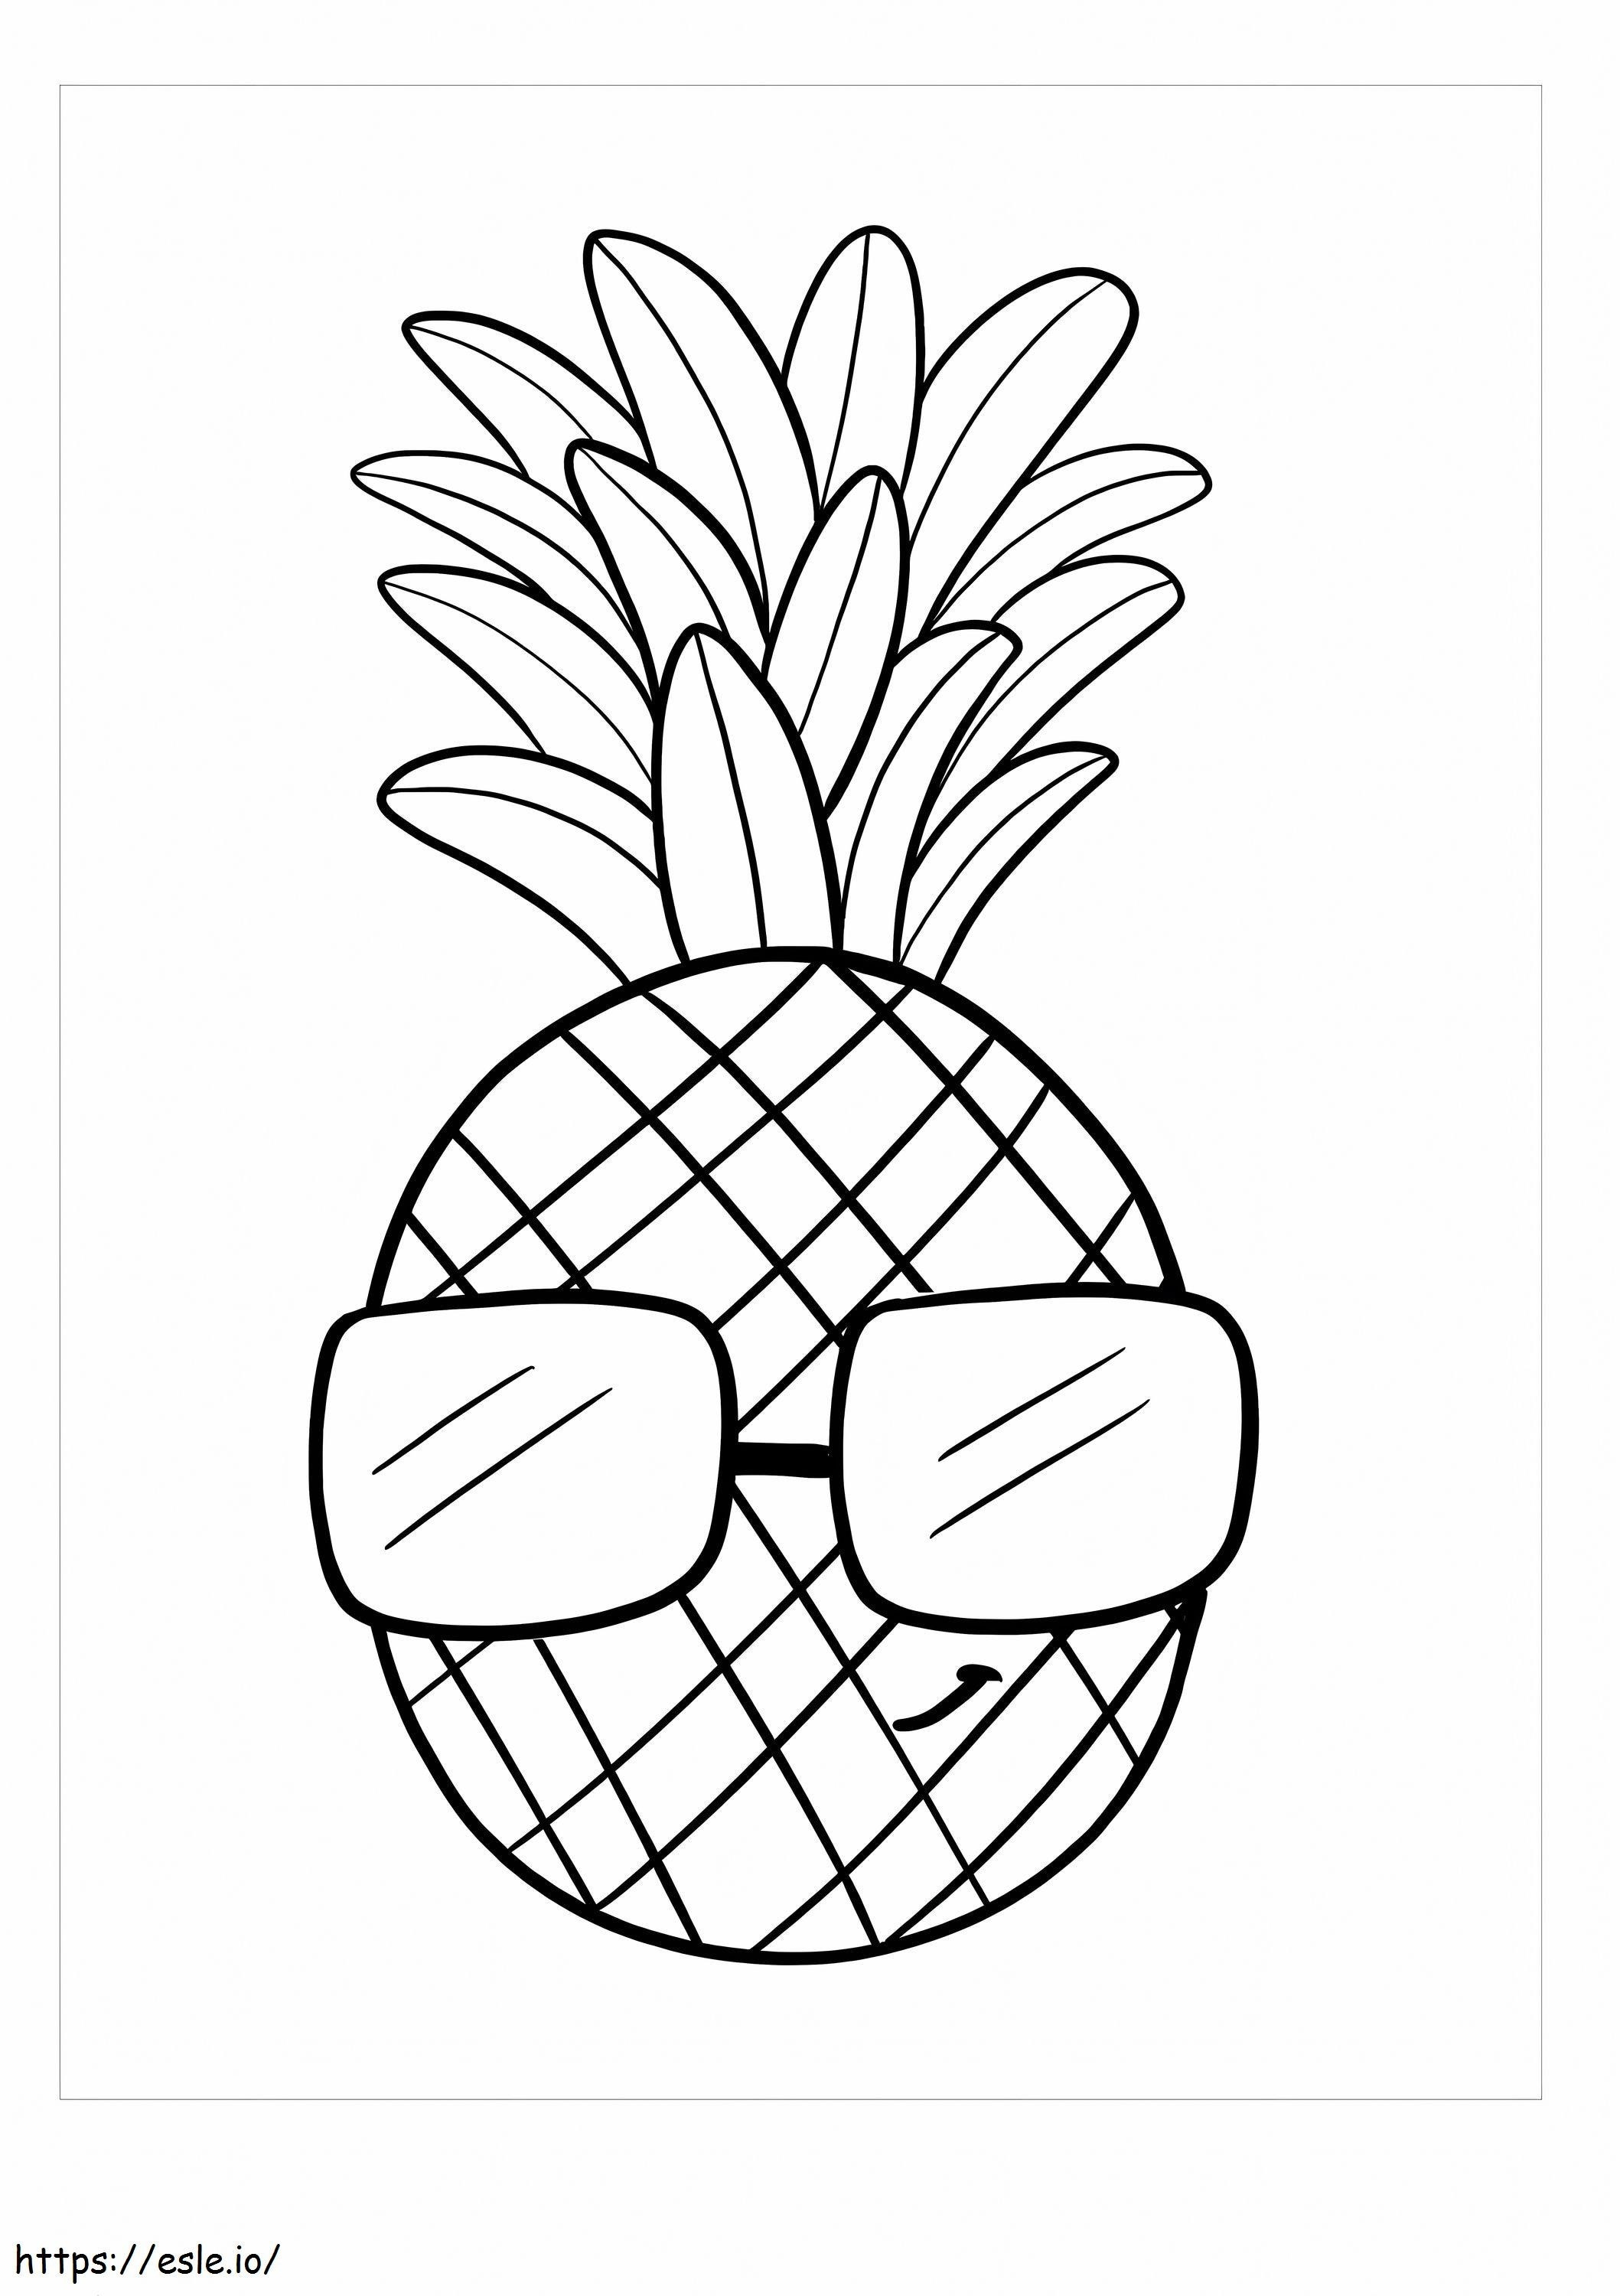 Fresh Pineapple Smiling coloring page